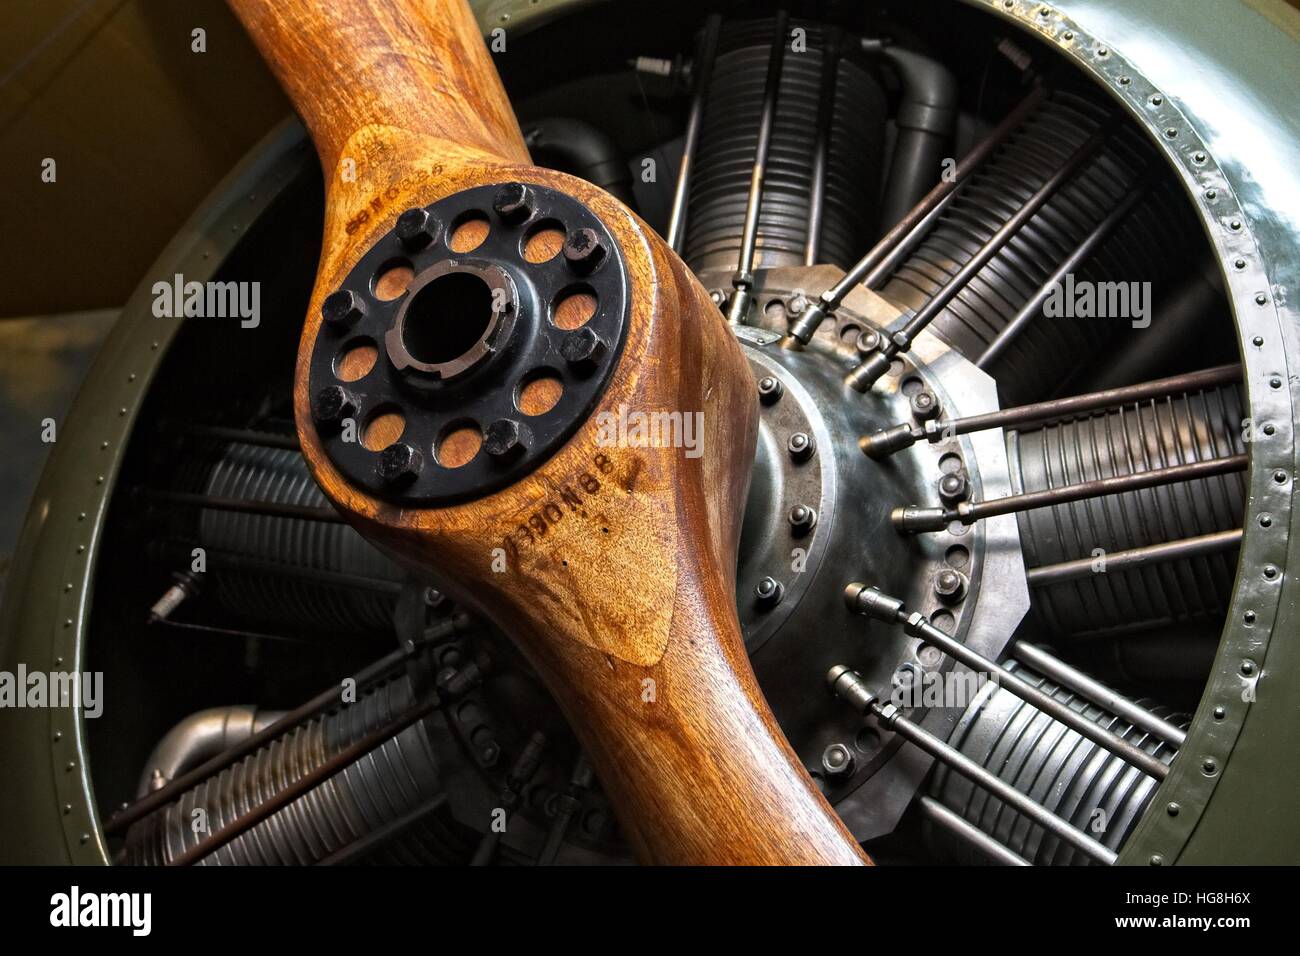 Star engine with wooden propeller of the old plane Stock Photo